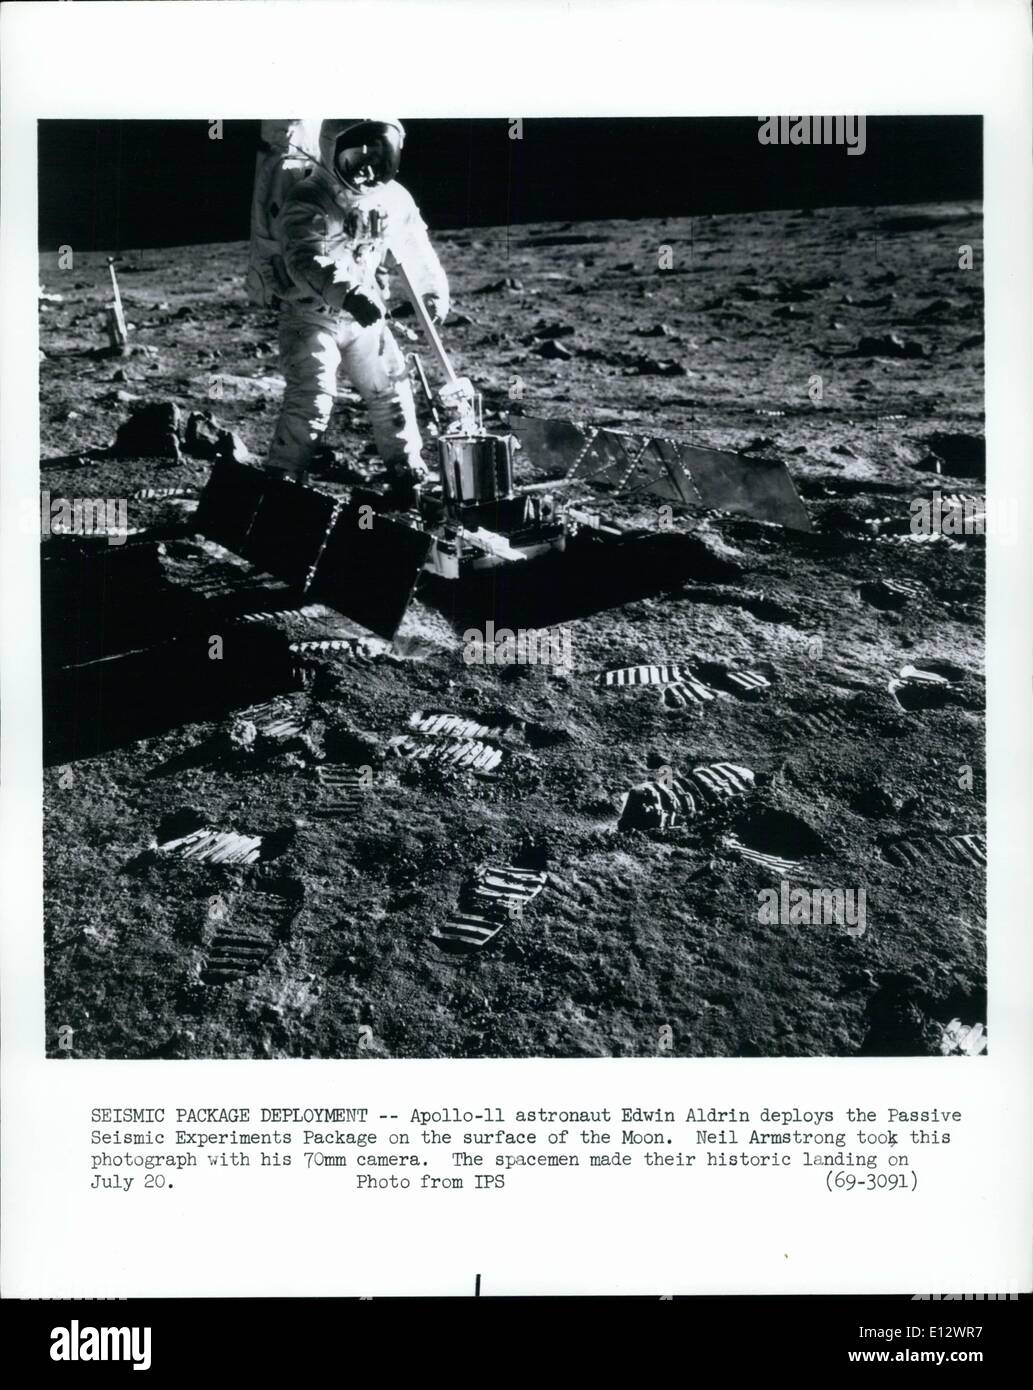 Feb. 26, 2012 - Seismic Package Deployment - Apollo-11 astronaut Edwin Aldrin deploys the Passive Seismic Experiments Package on the surface of the Moon. Neil Armstrong took this photograph with his 70mm camera. The space made their historic landing on July 20. Stock Photo